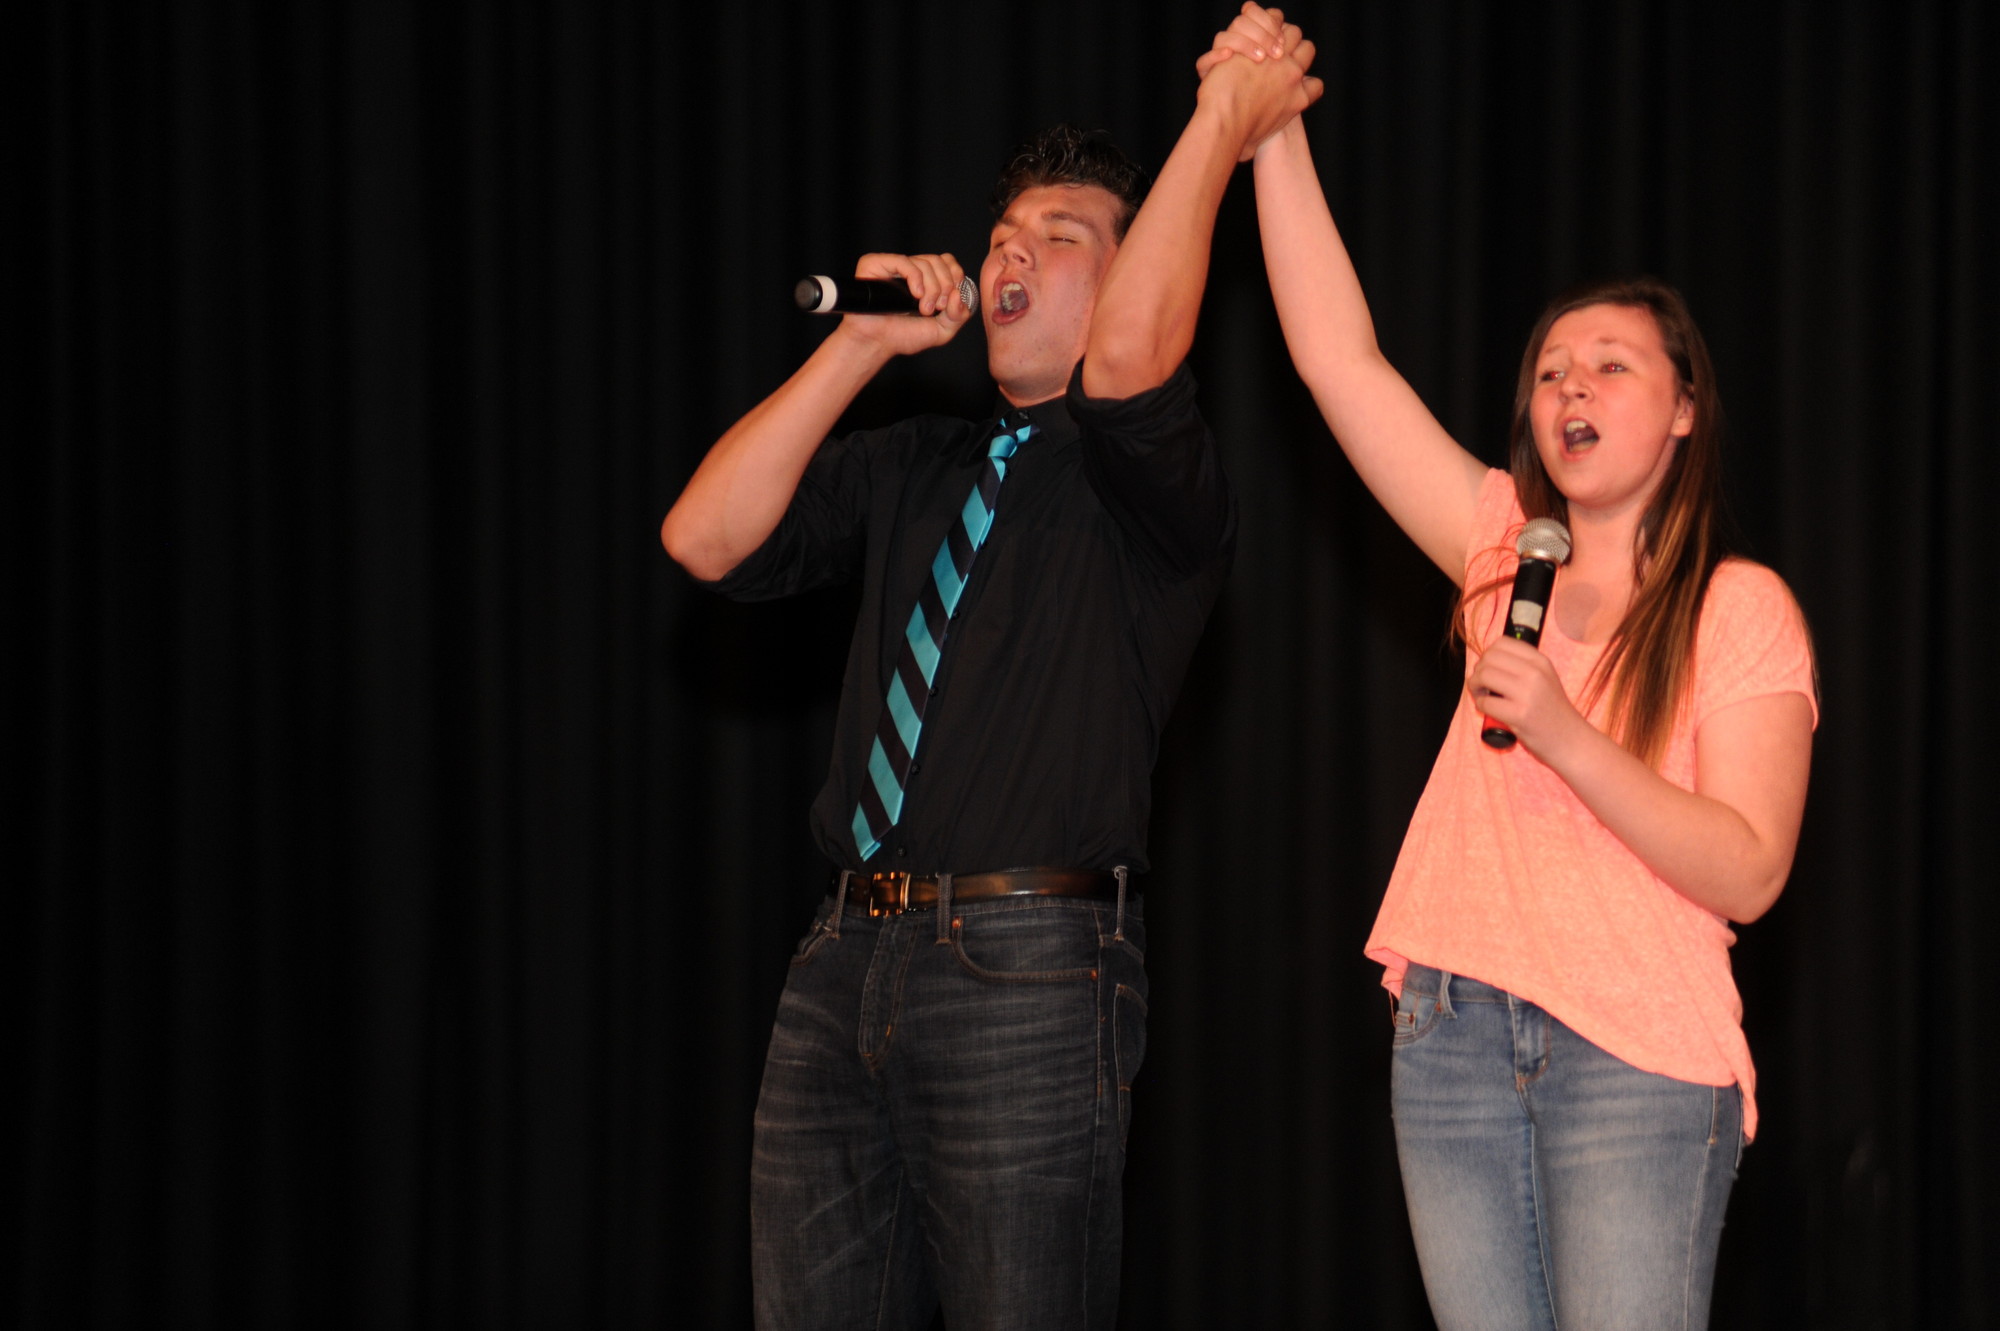 Bailey and Riley Walsh’sang a duet to “When You’re Home” from the Tony award-winning Broadway show “In the Heights.”